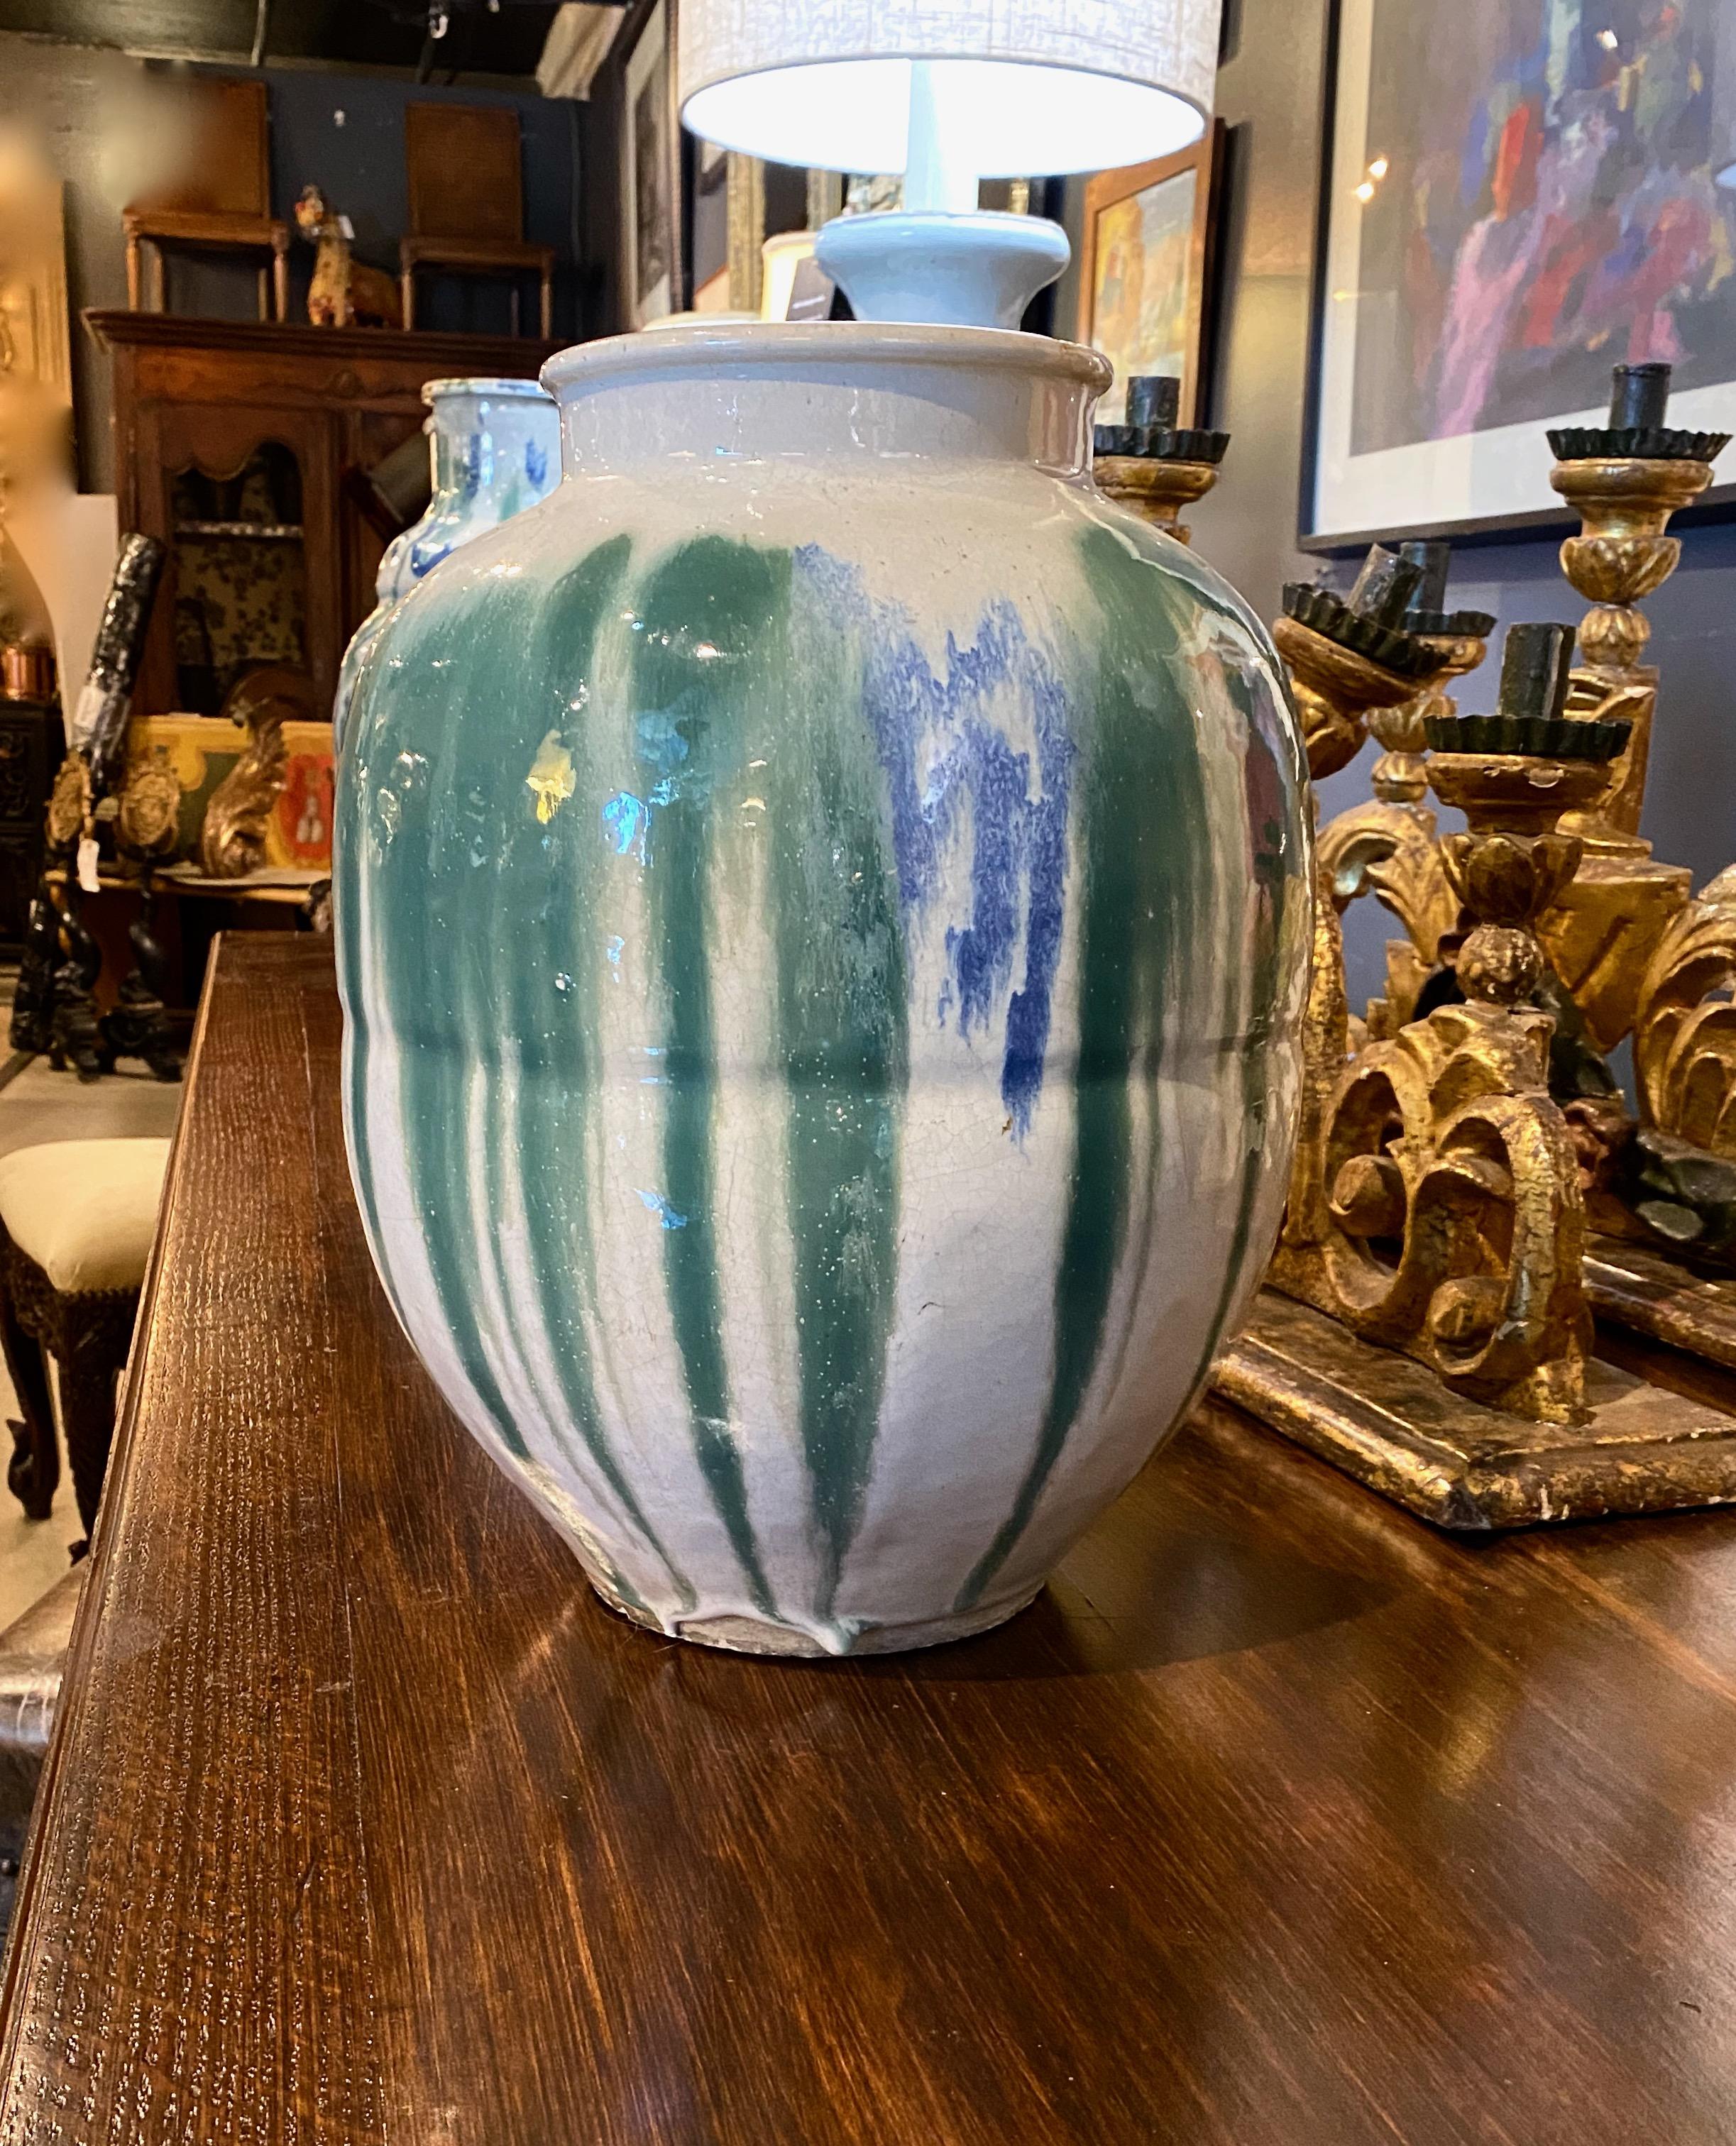 This is an exceptionally beautiful signed Shigaraki tea storage jar that dates to the later Meiji period. The quality of craftsmanship is exceptional. The thick drip glaze is abstract in style and conveys graceful light and movement. The jar is